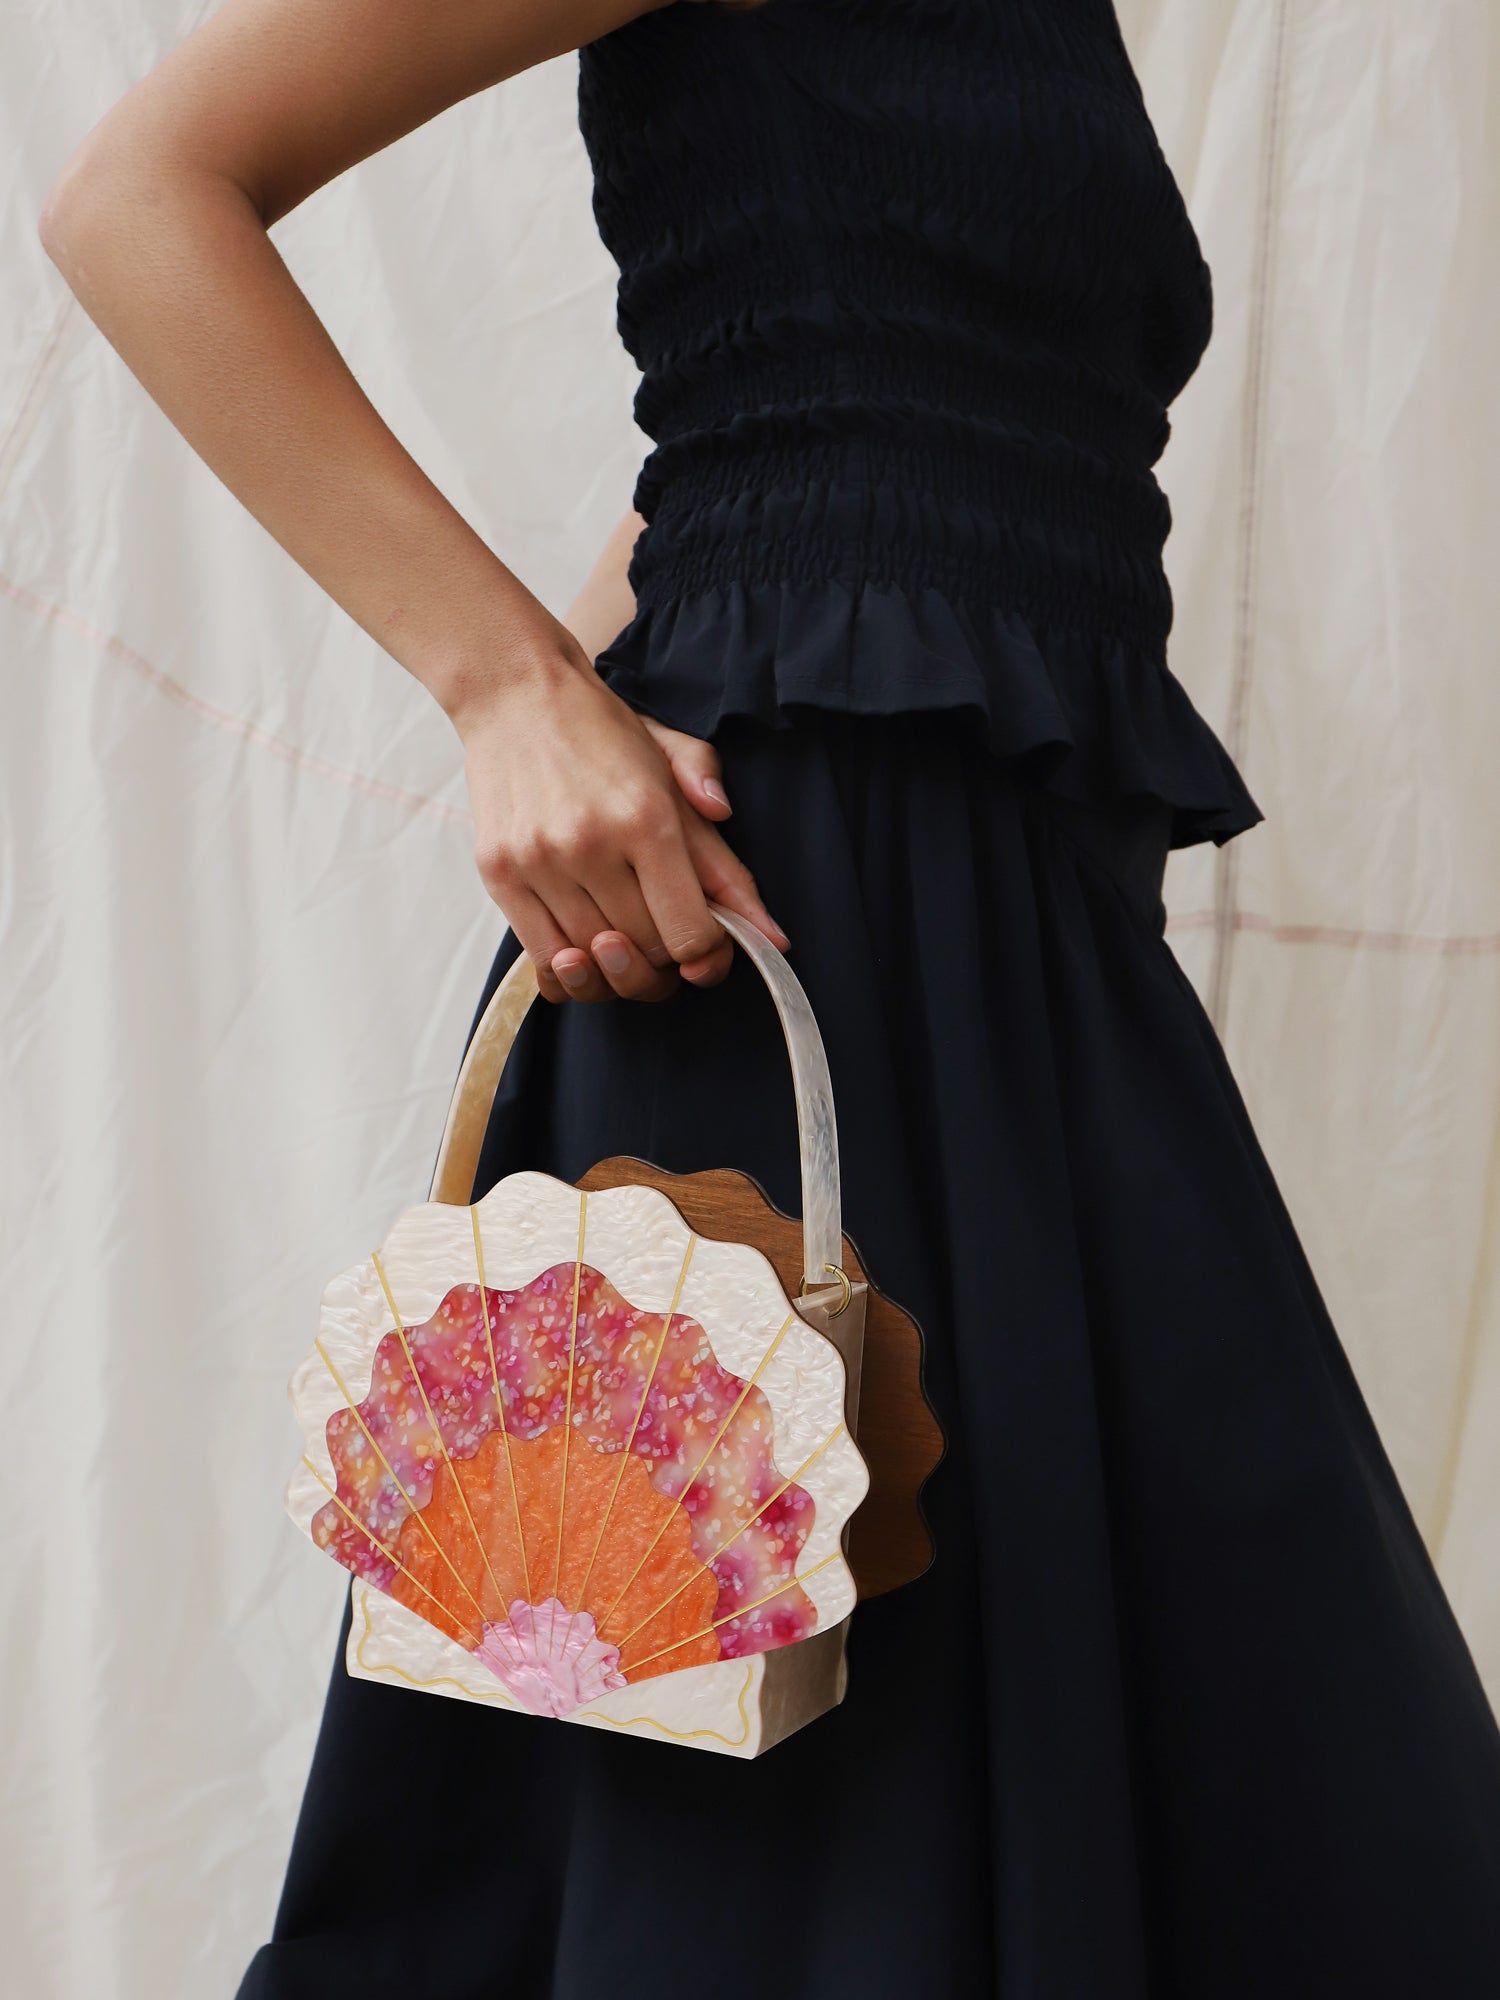 Scallop Shell Bag in Sunset